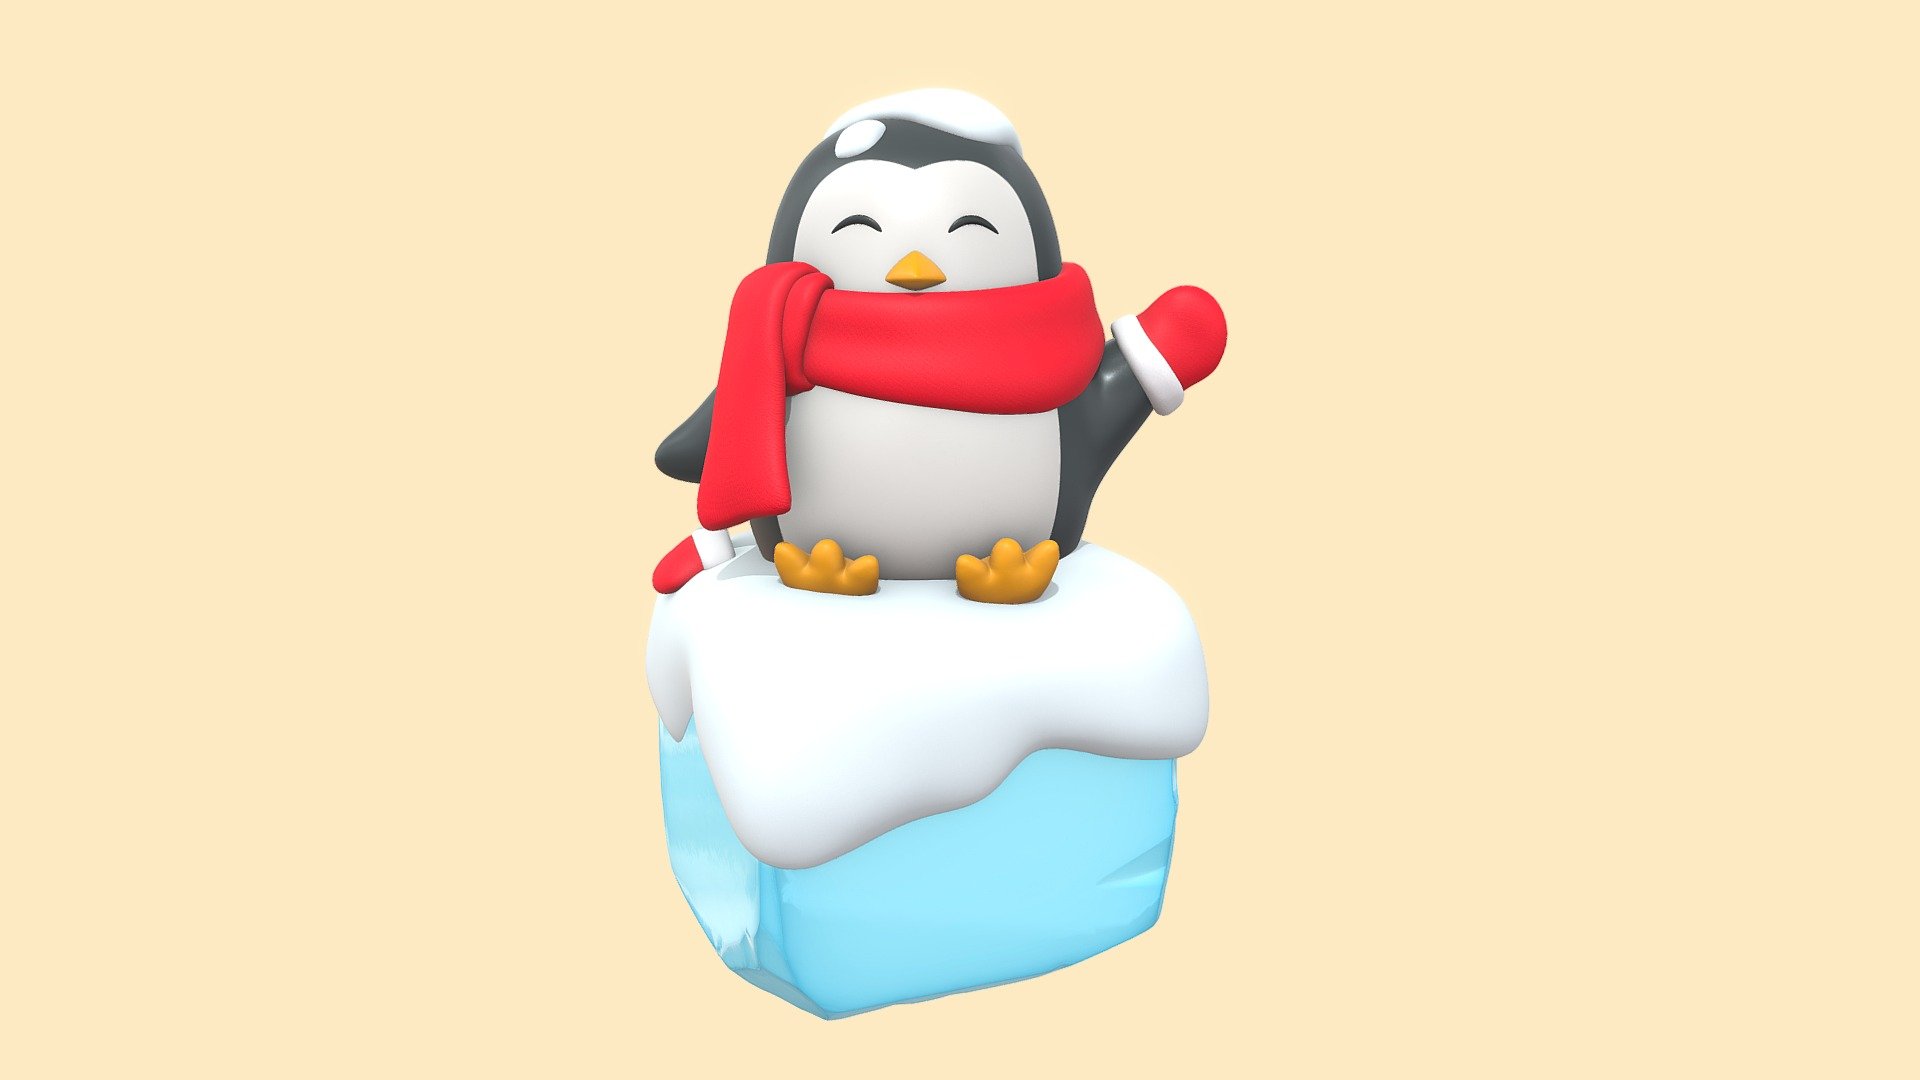 You can support me here ♥

https://ko-fi.com/kiiztie - Christmas Cute Penguin - Download Free 3D model by kiiztie 3d model